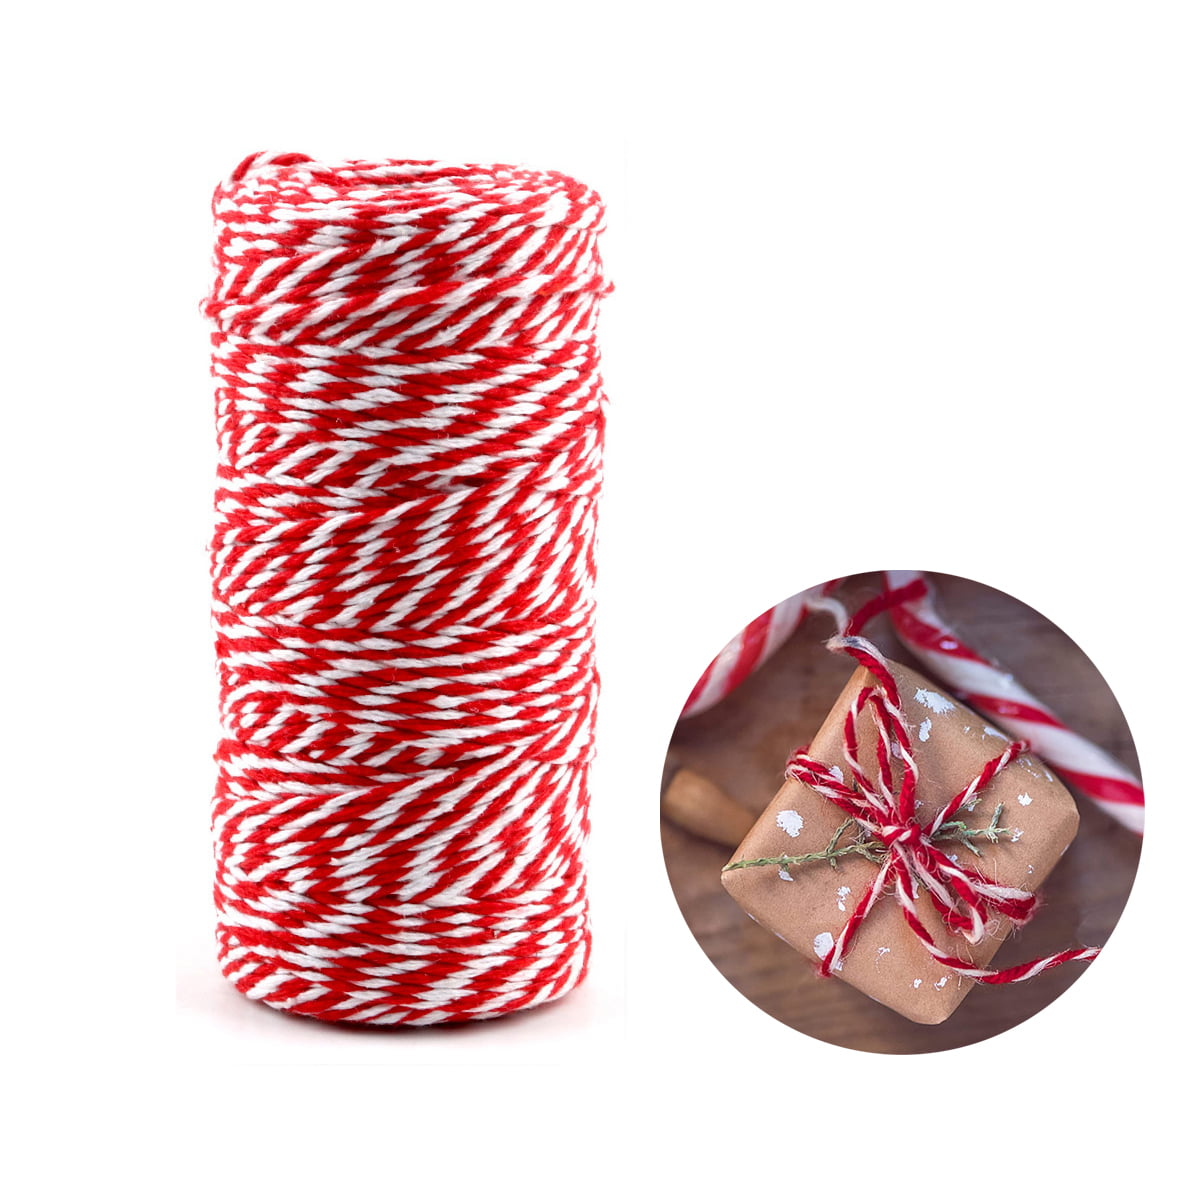 100m Chunky Red & White String Cord Christmas Gift Wrap Candy Cane Bakers Twine, Women's, Size: One Size